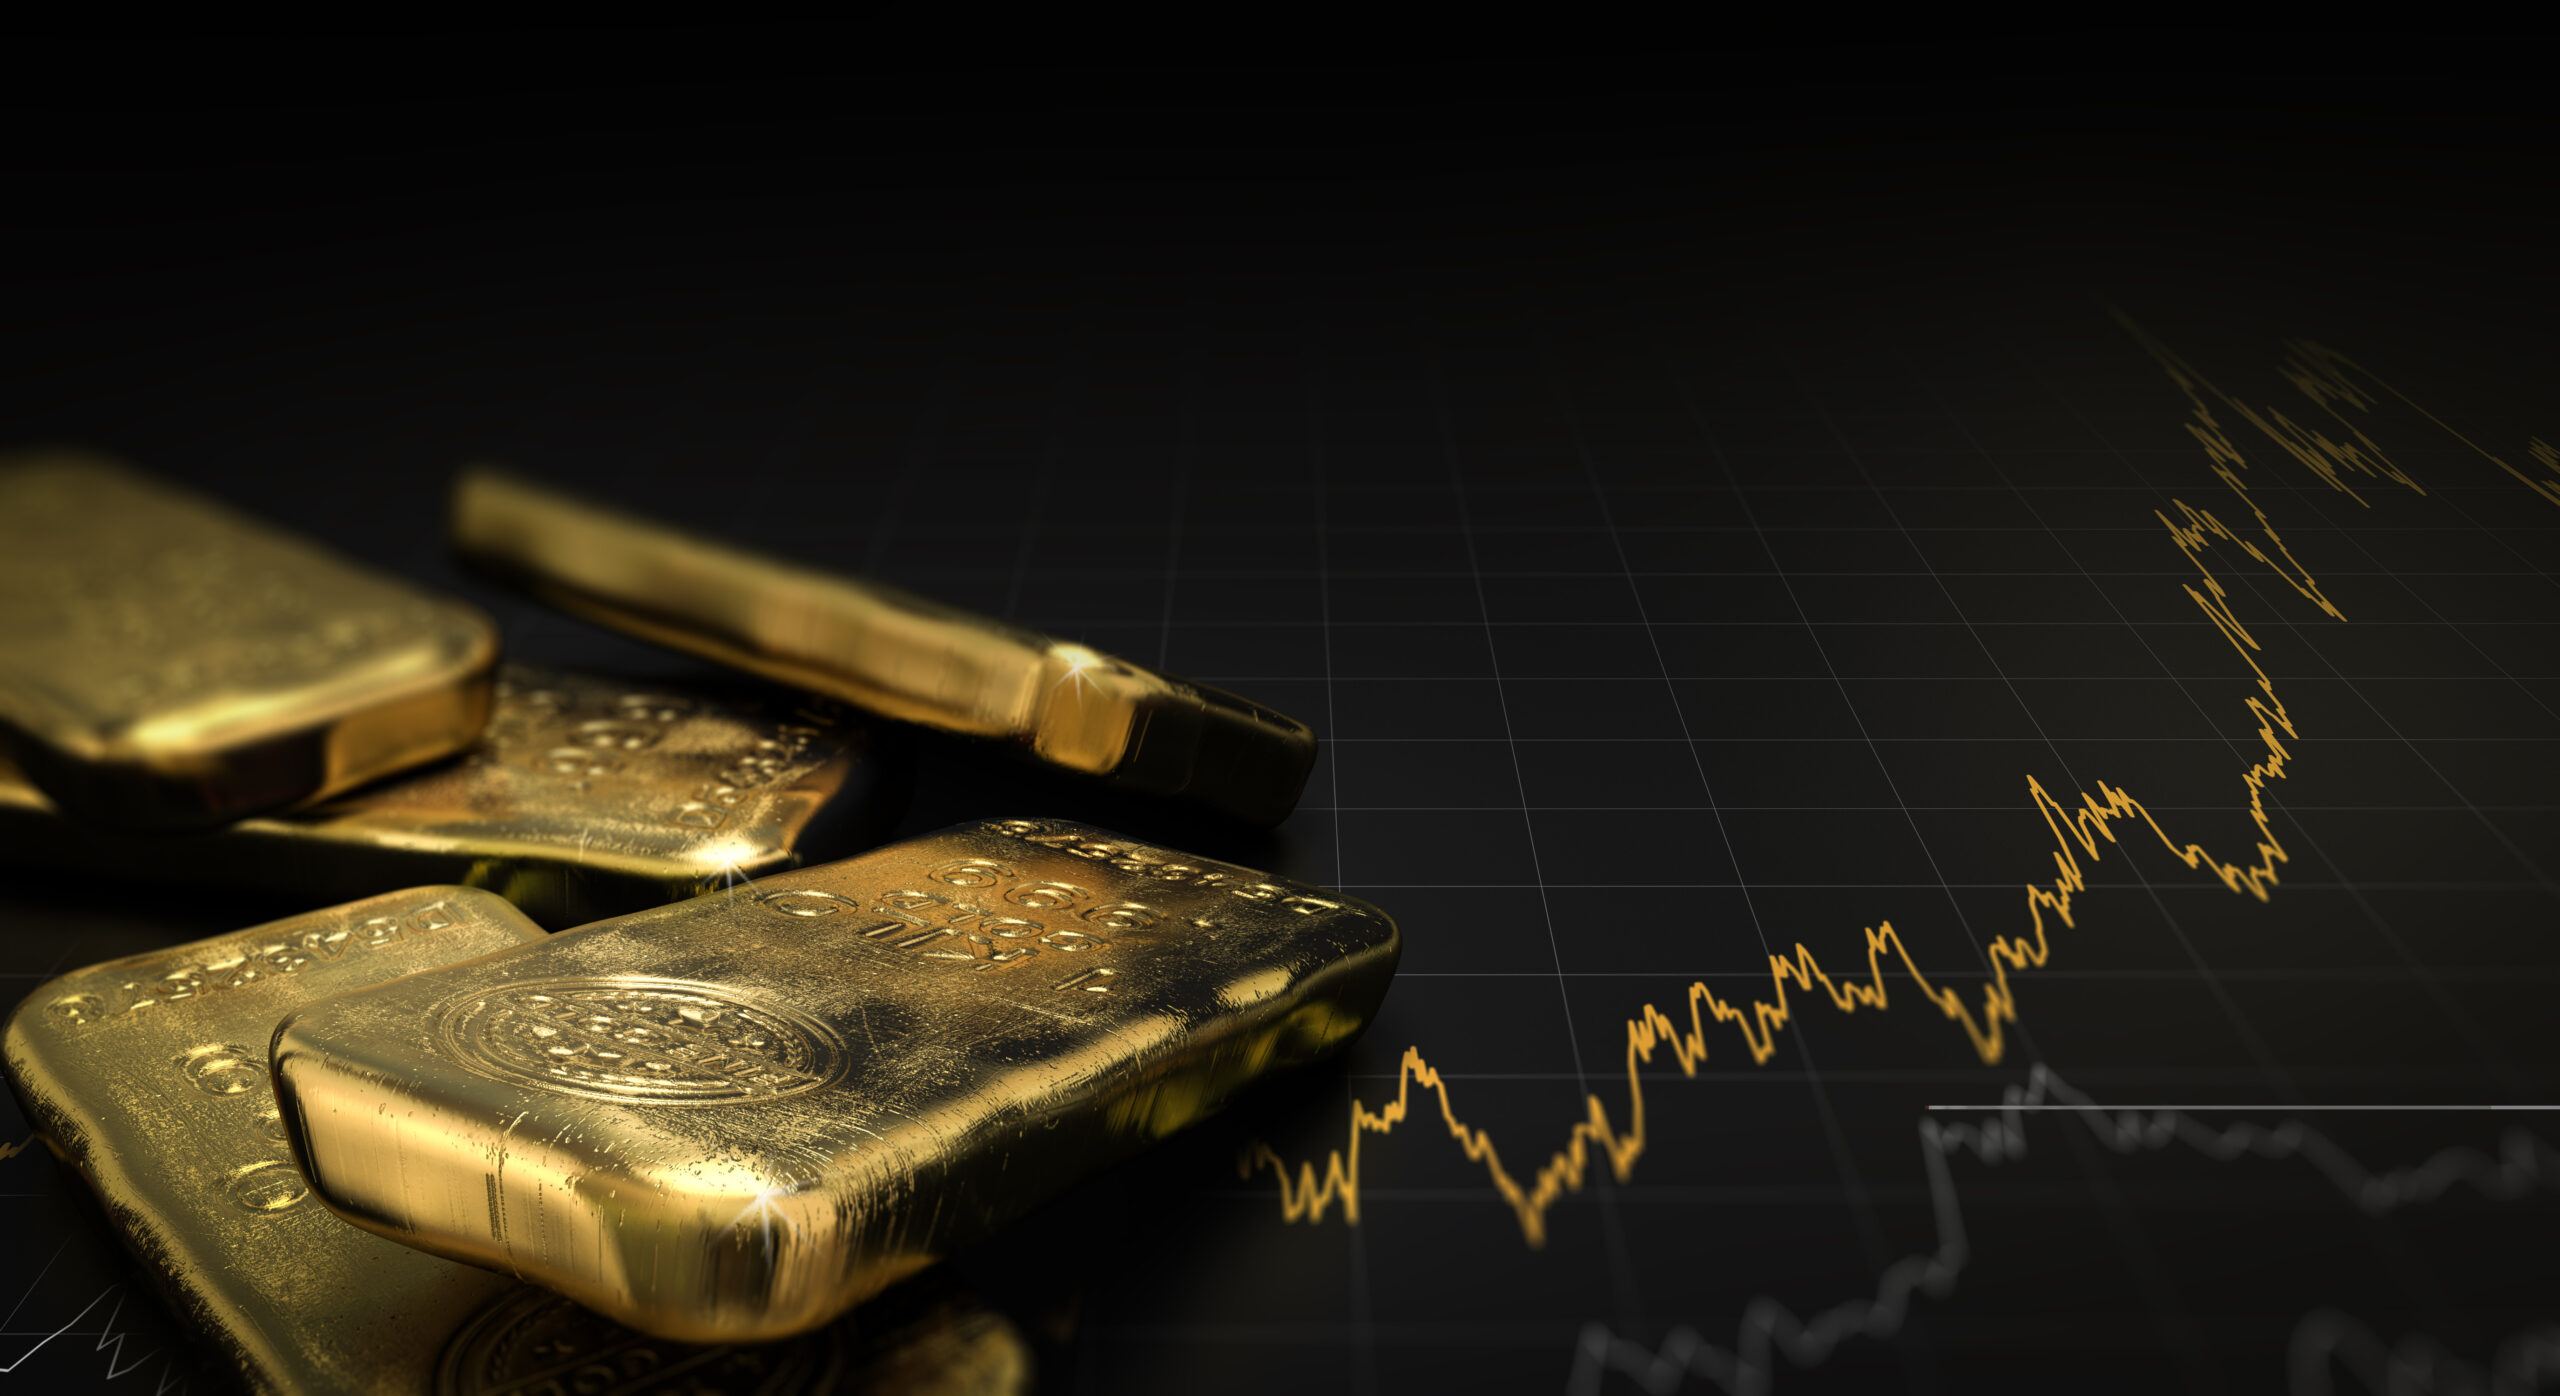 Gold bars and graph